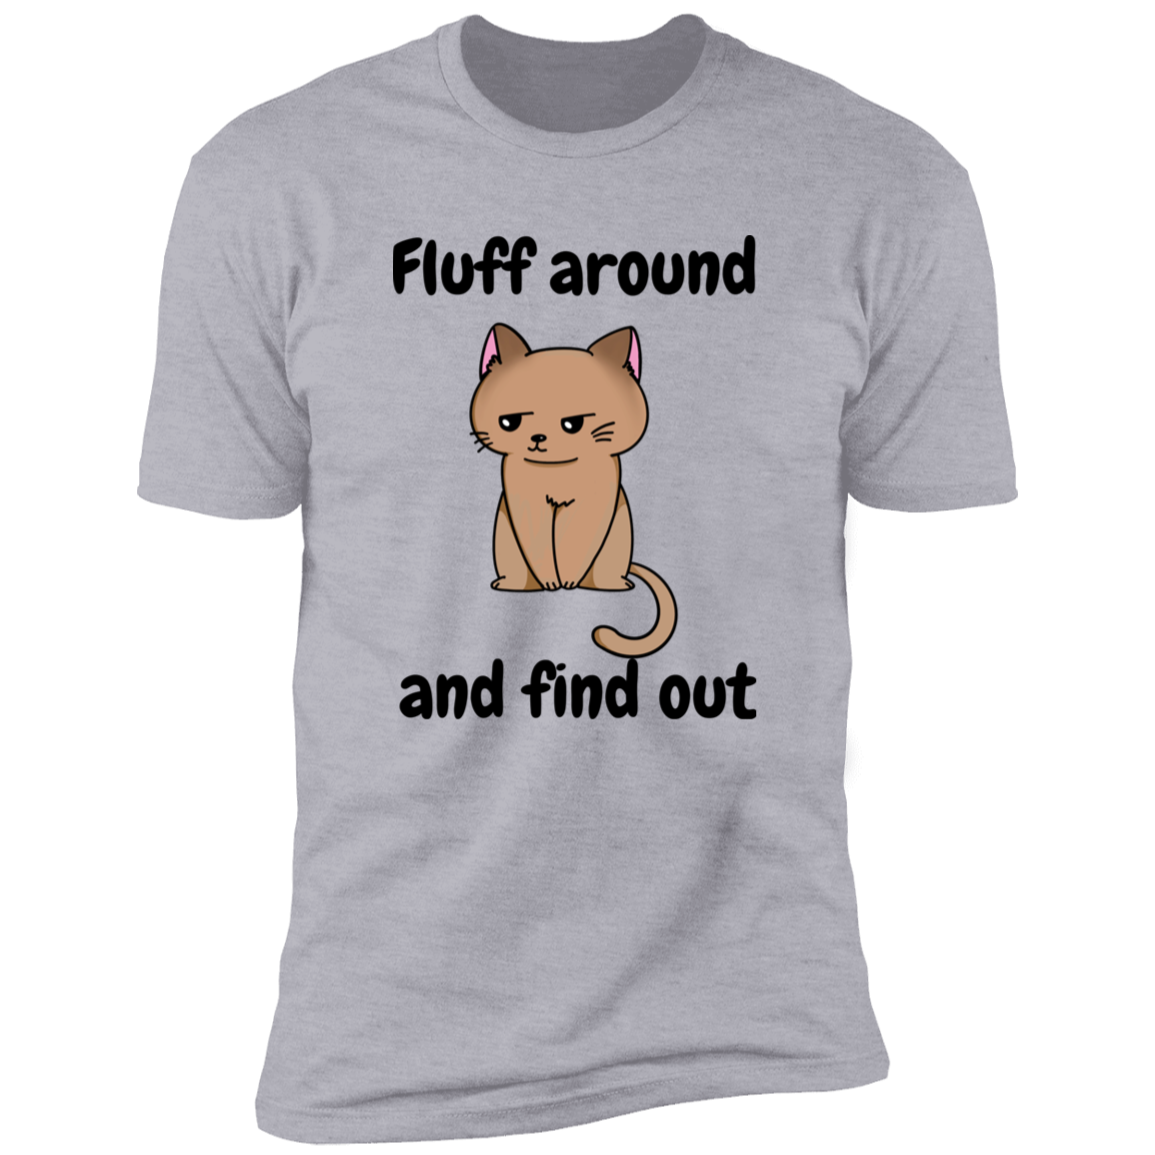 Fluff Around and Find Out Cat Shirt, funny cat shirt, funny cat shirt for humans, in light heather gray